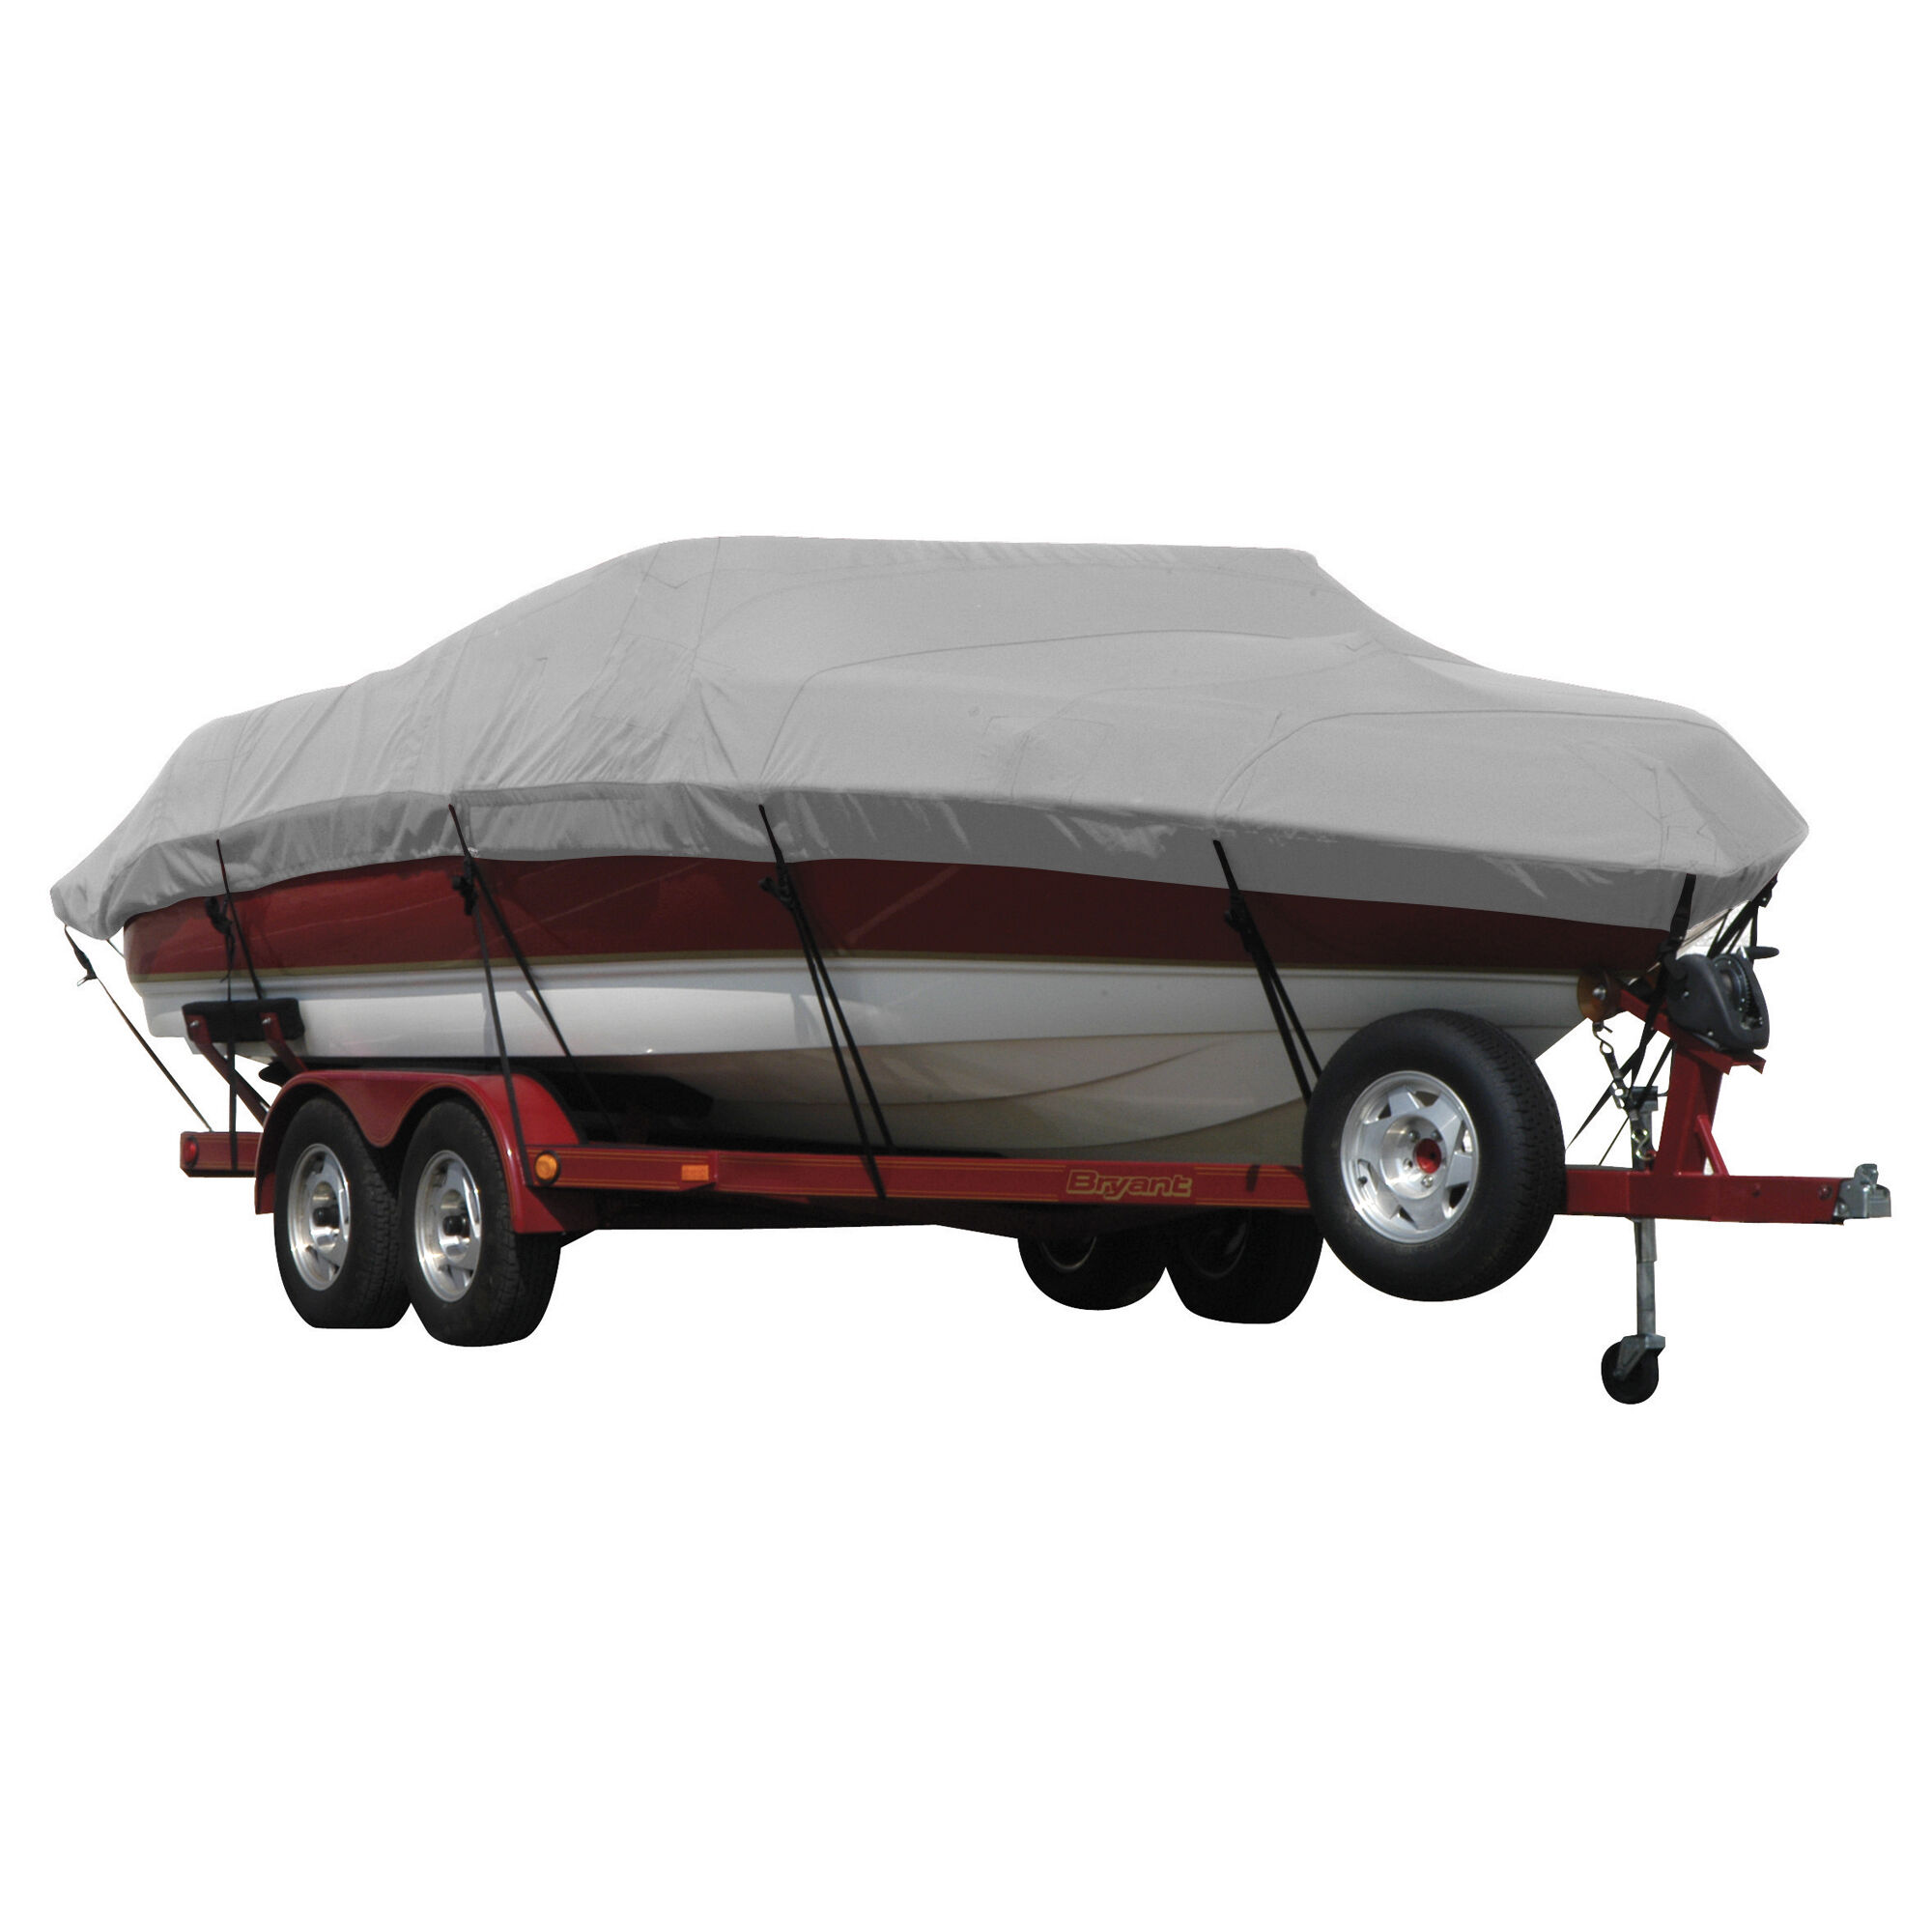 Covermate Exact Fit Sunbrella Boat Cover for Caribe Inflatables Dl-12 Dl-12 w/ Console O/B. Grey